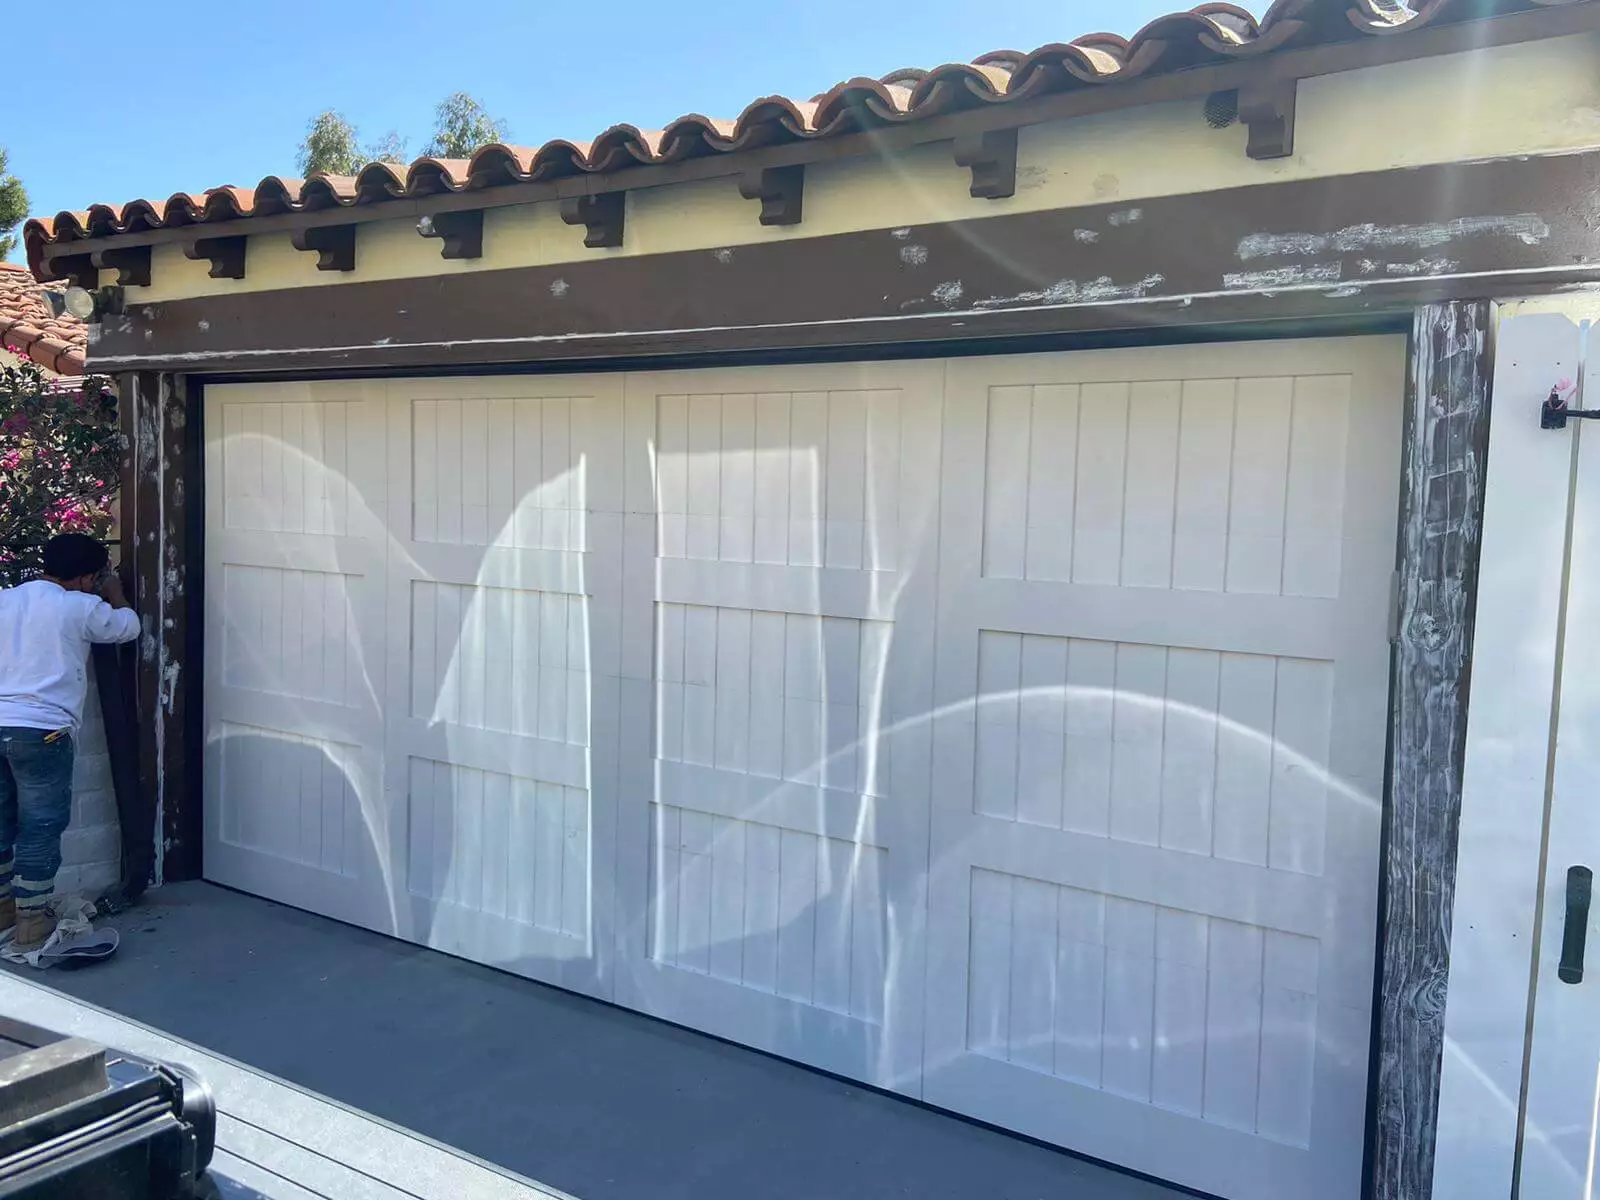 Why Hire Professional Garage Repair Services?